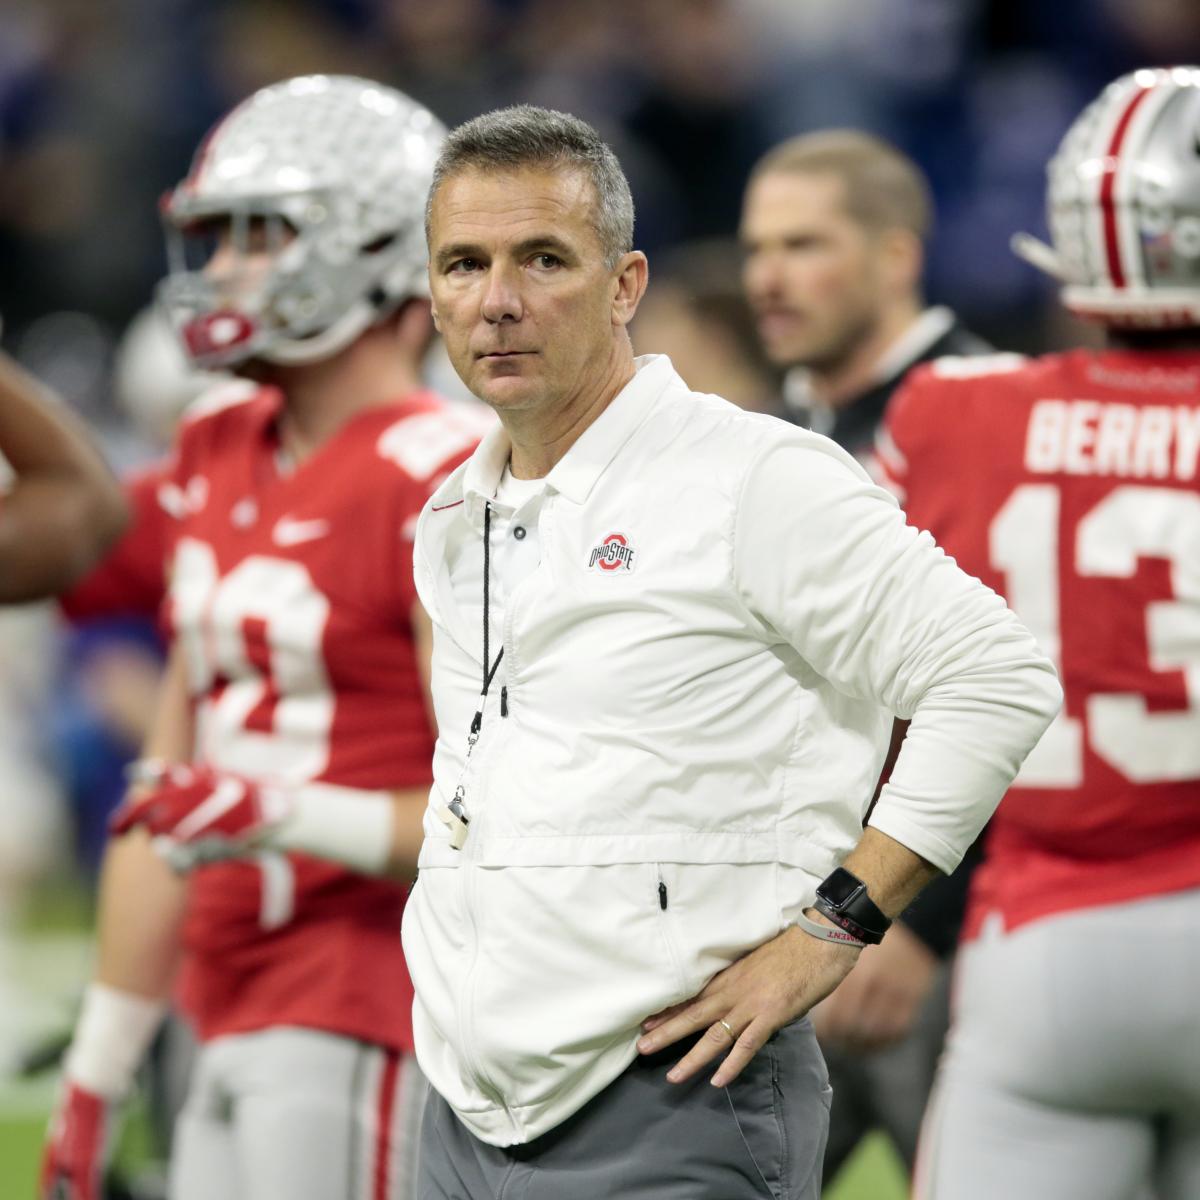 Urban Meyer Says 'We'll See' When Asked If He'd Be Open to Coaching